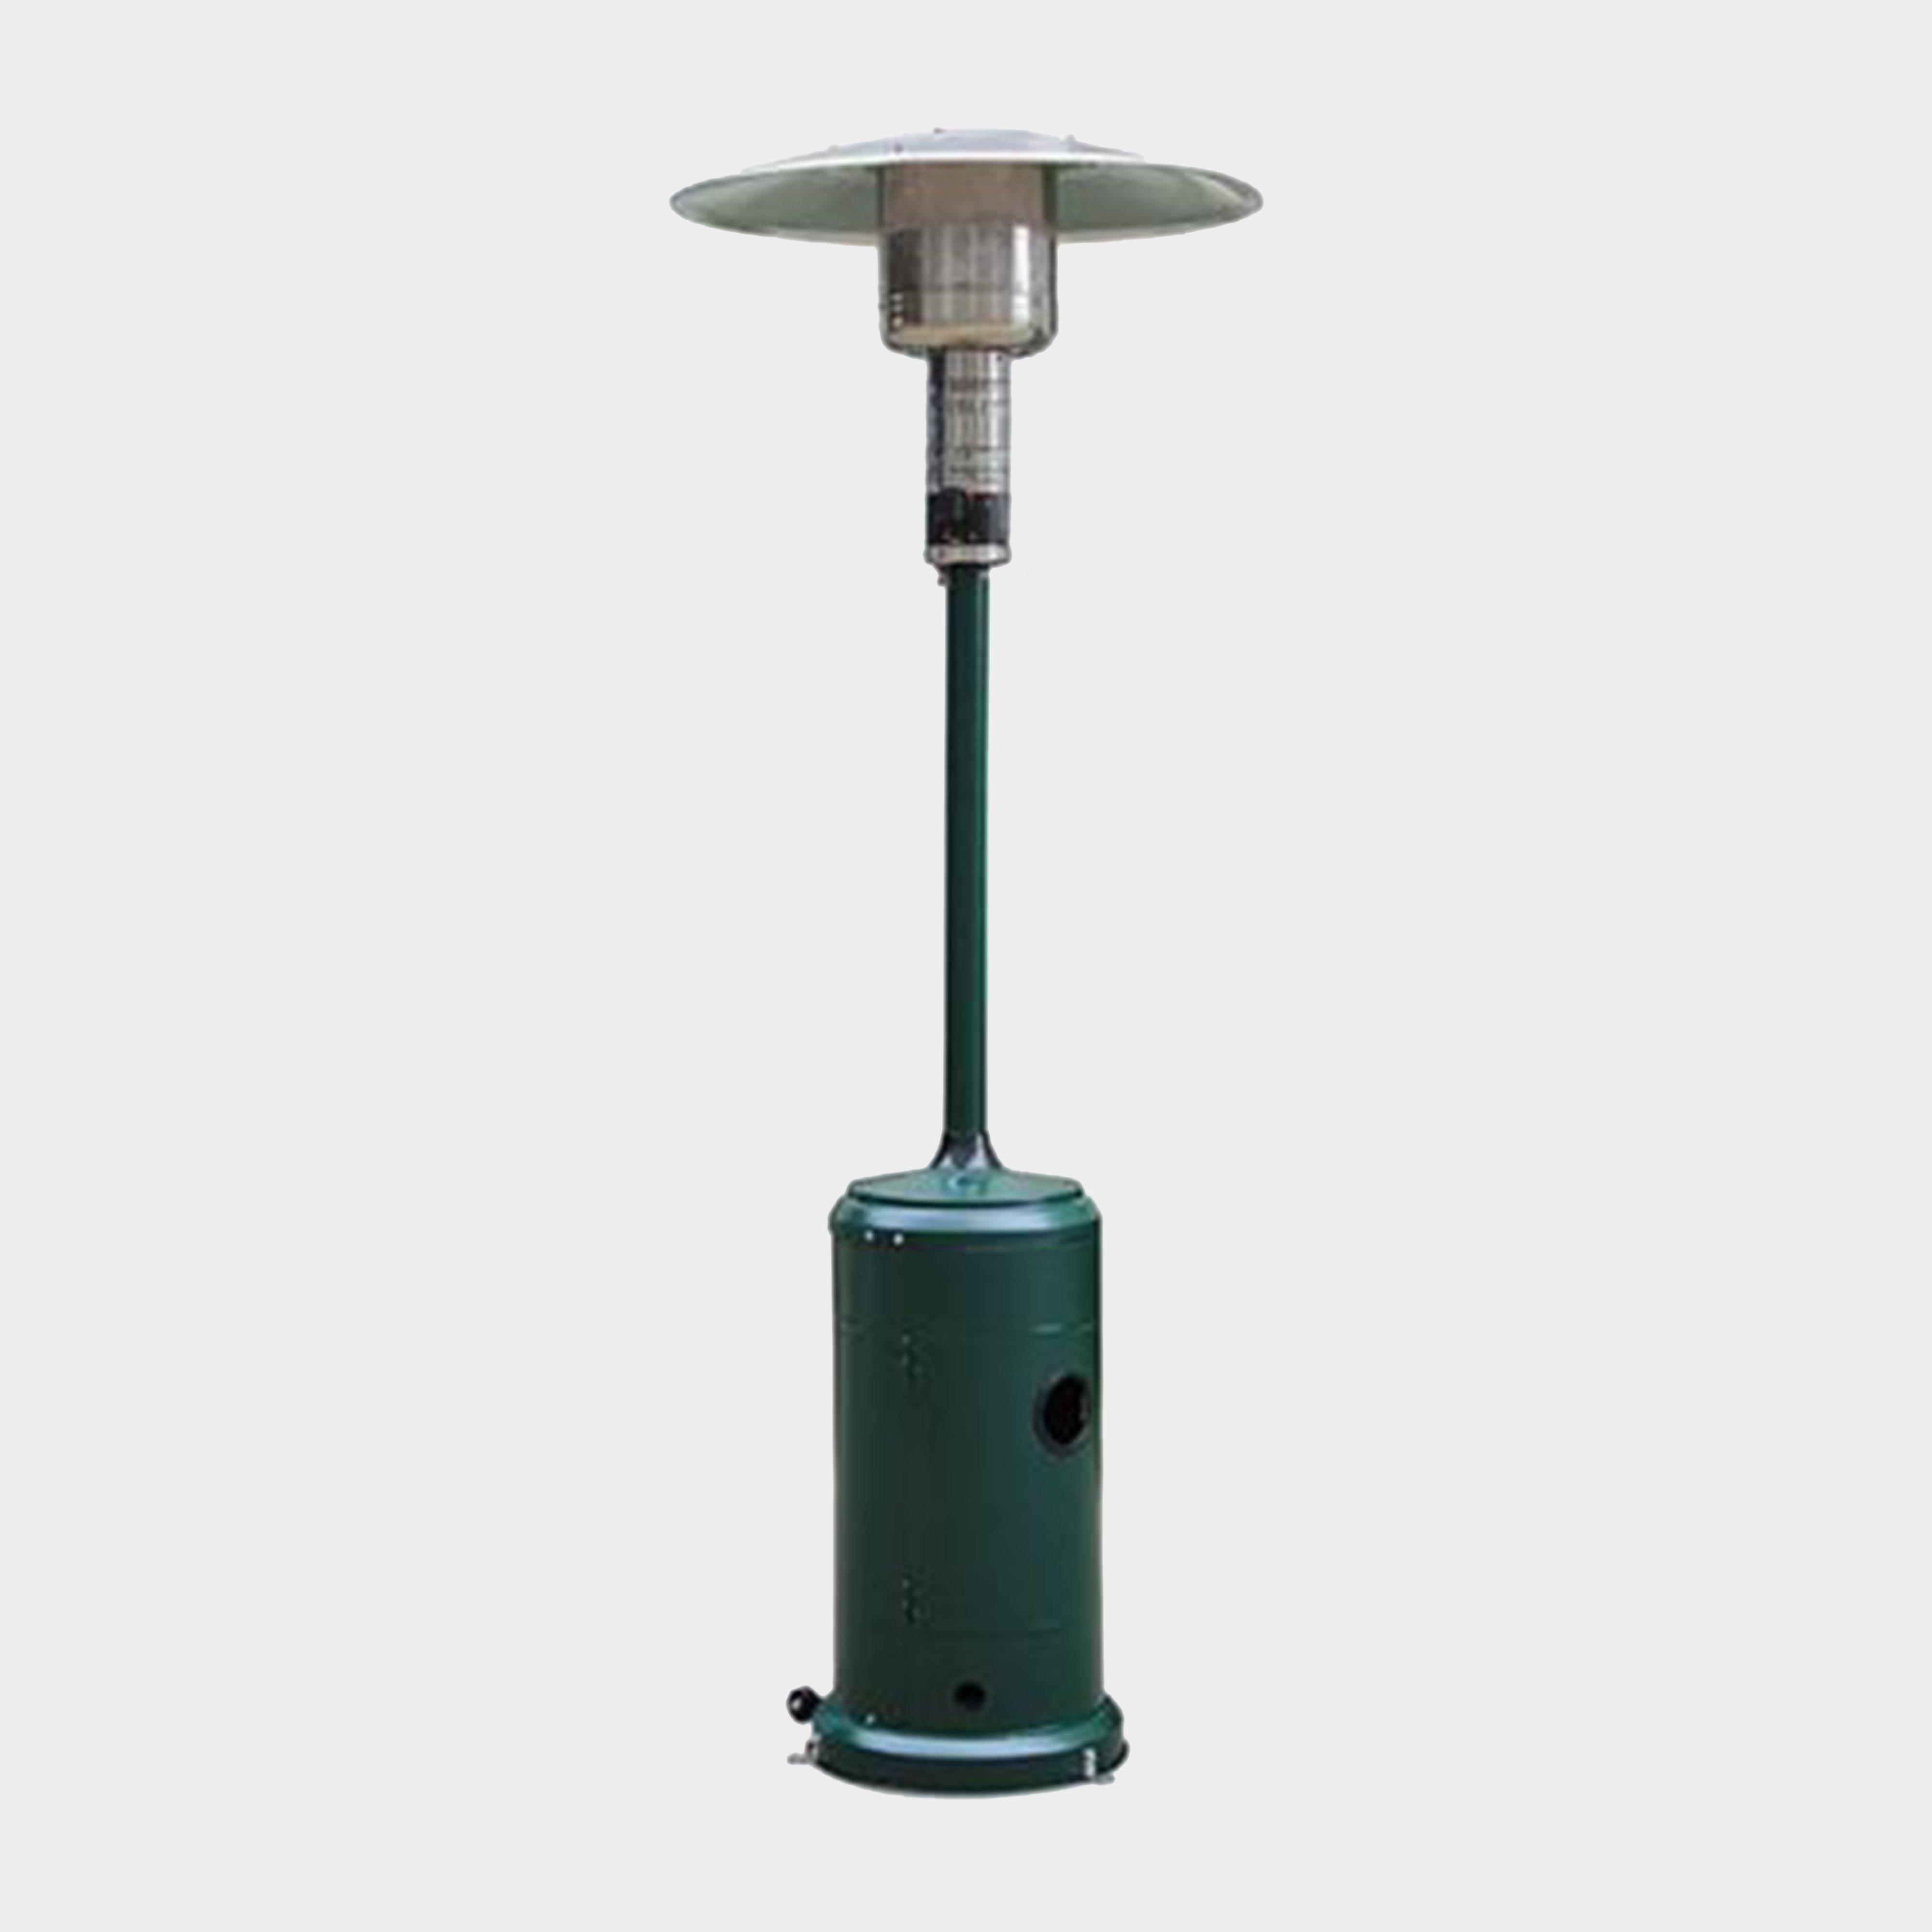 Image of Quest Patio Heater - Green/Grn, Green/GRN